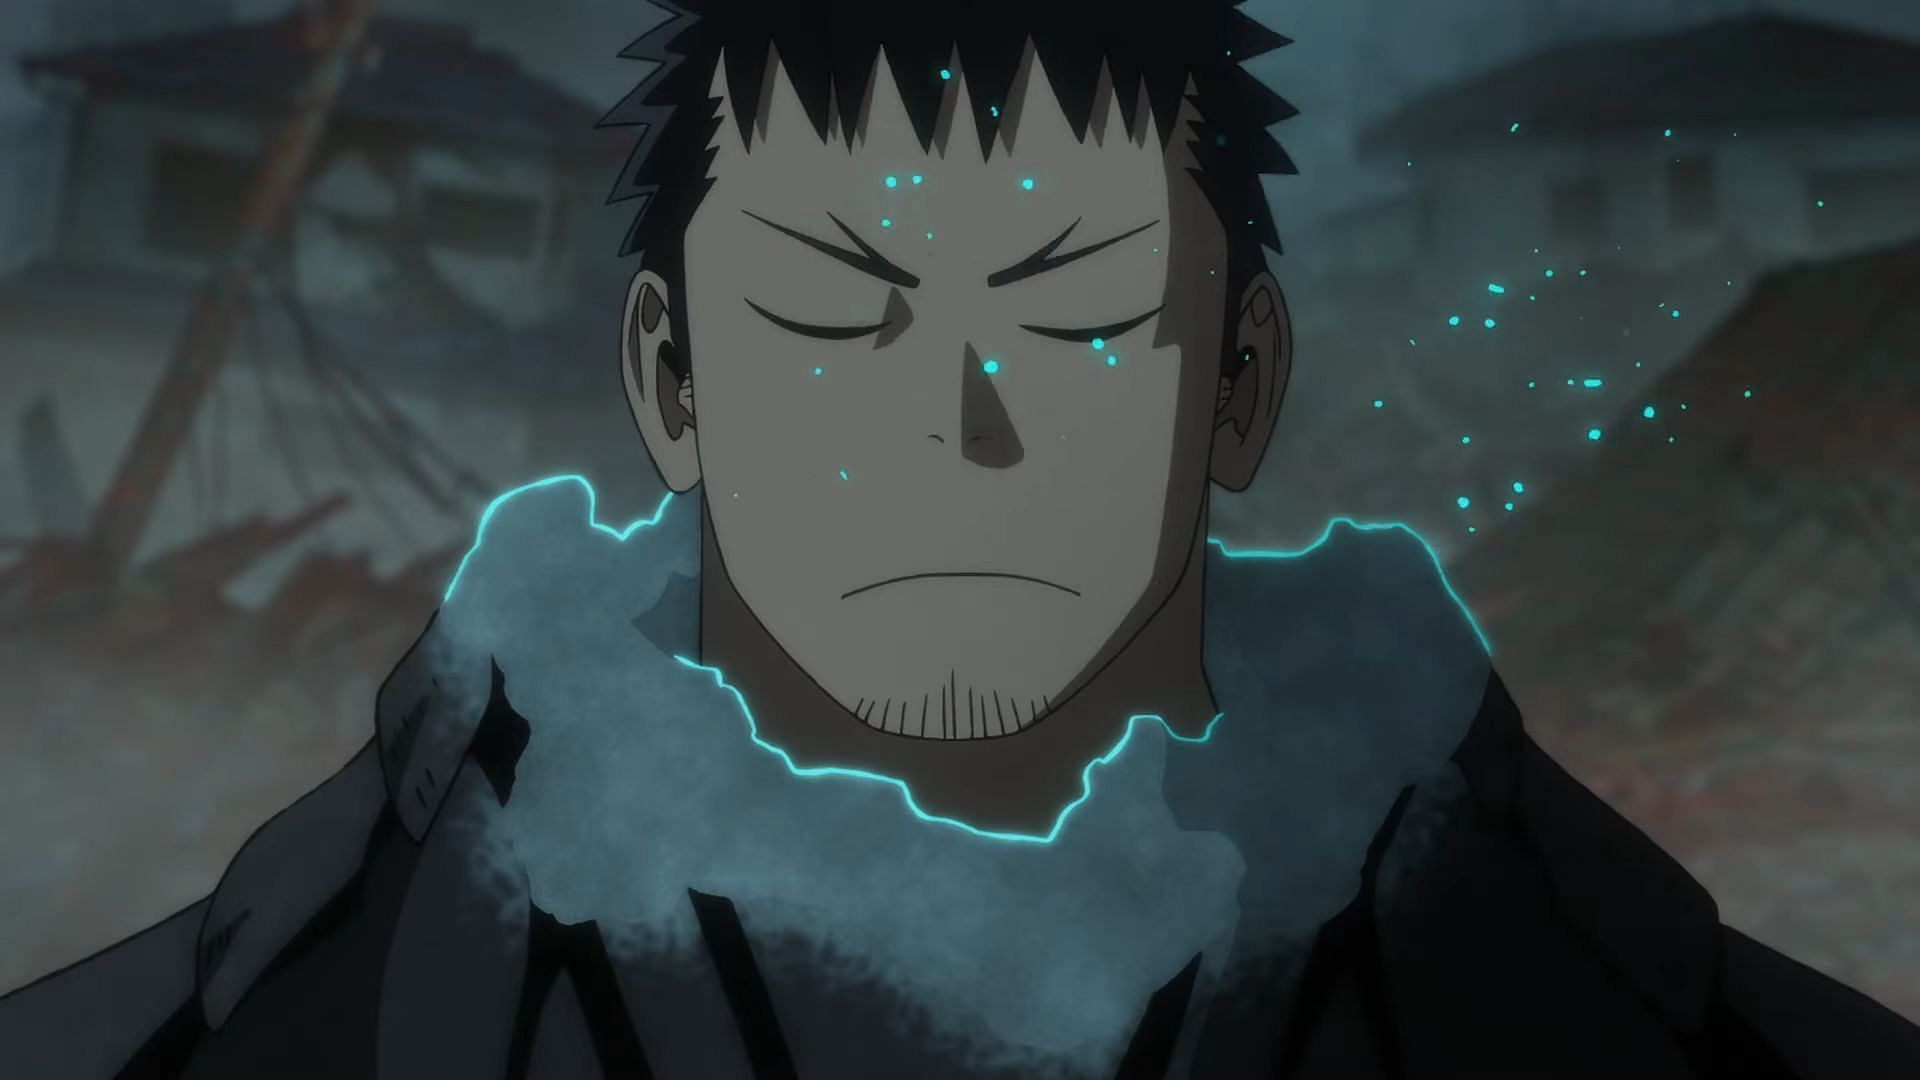 Kafka could be forced to use his full powers in Kaiju No. 8 episode 10 (Image via Production I.G)